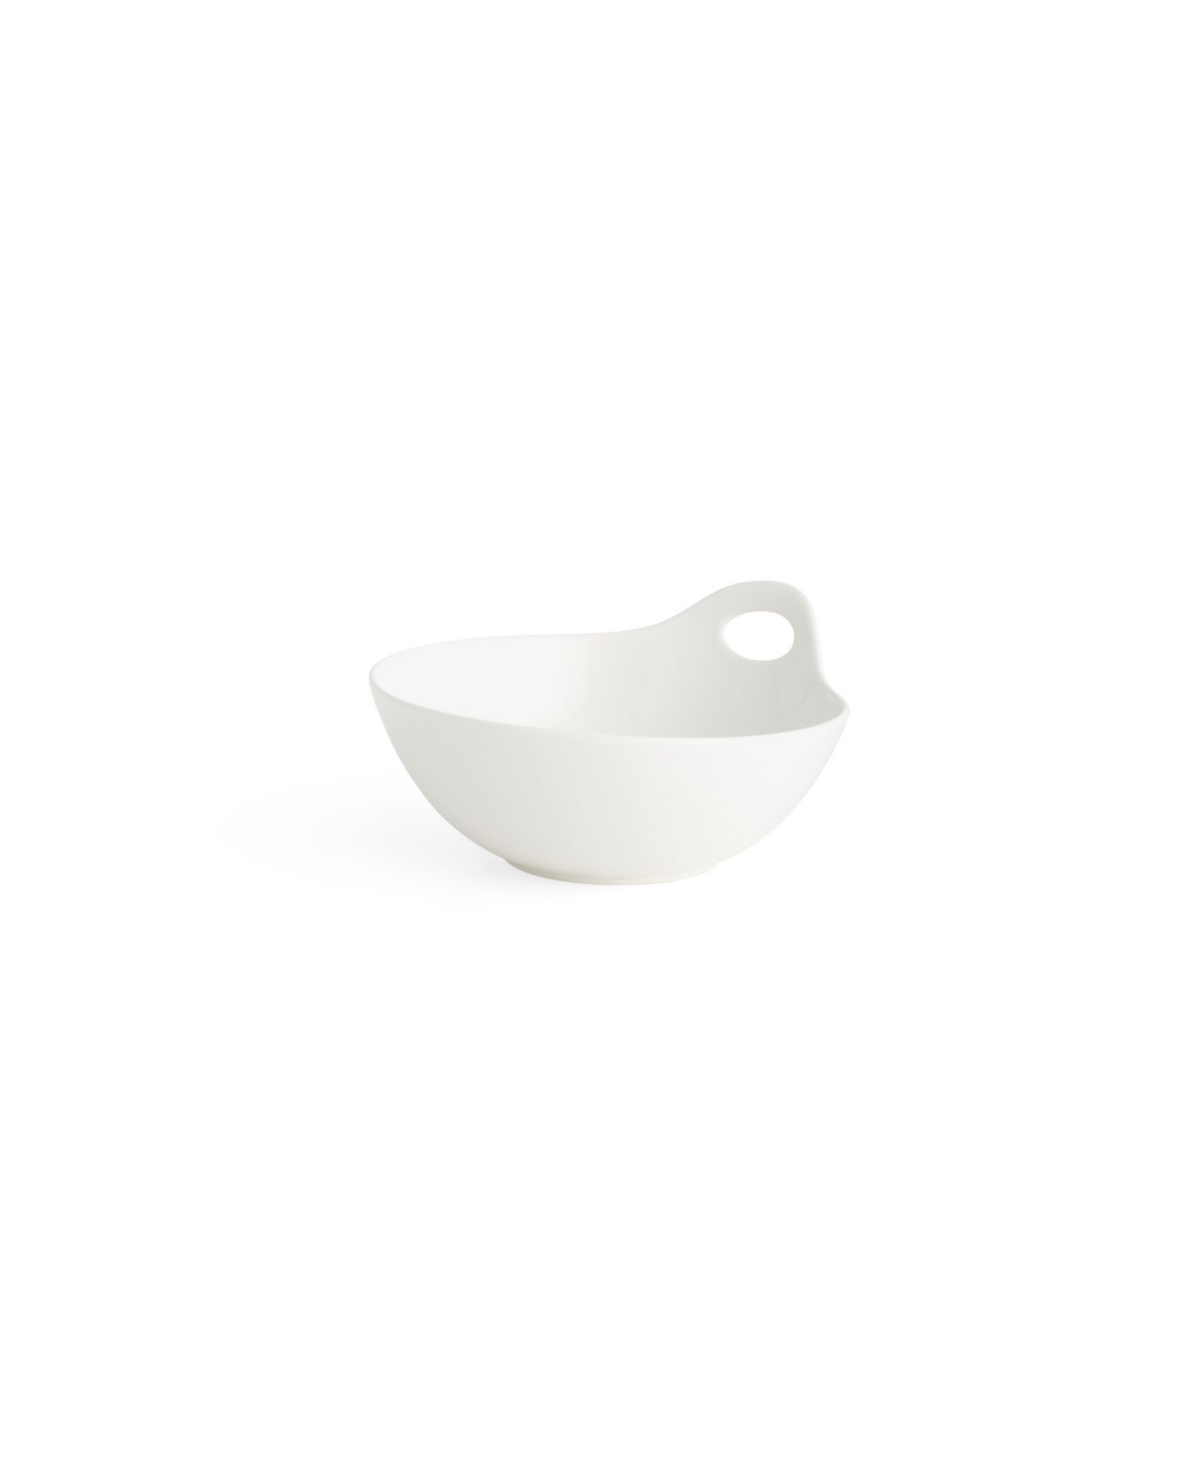 Portables 4 Piece All Purpose Bowls, Service for 4 - White